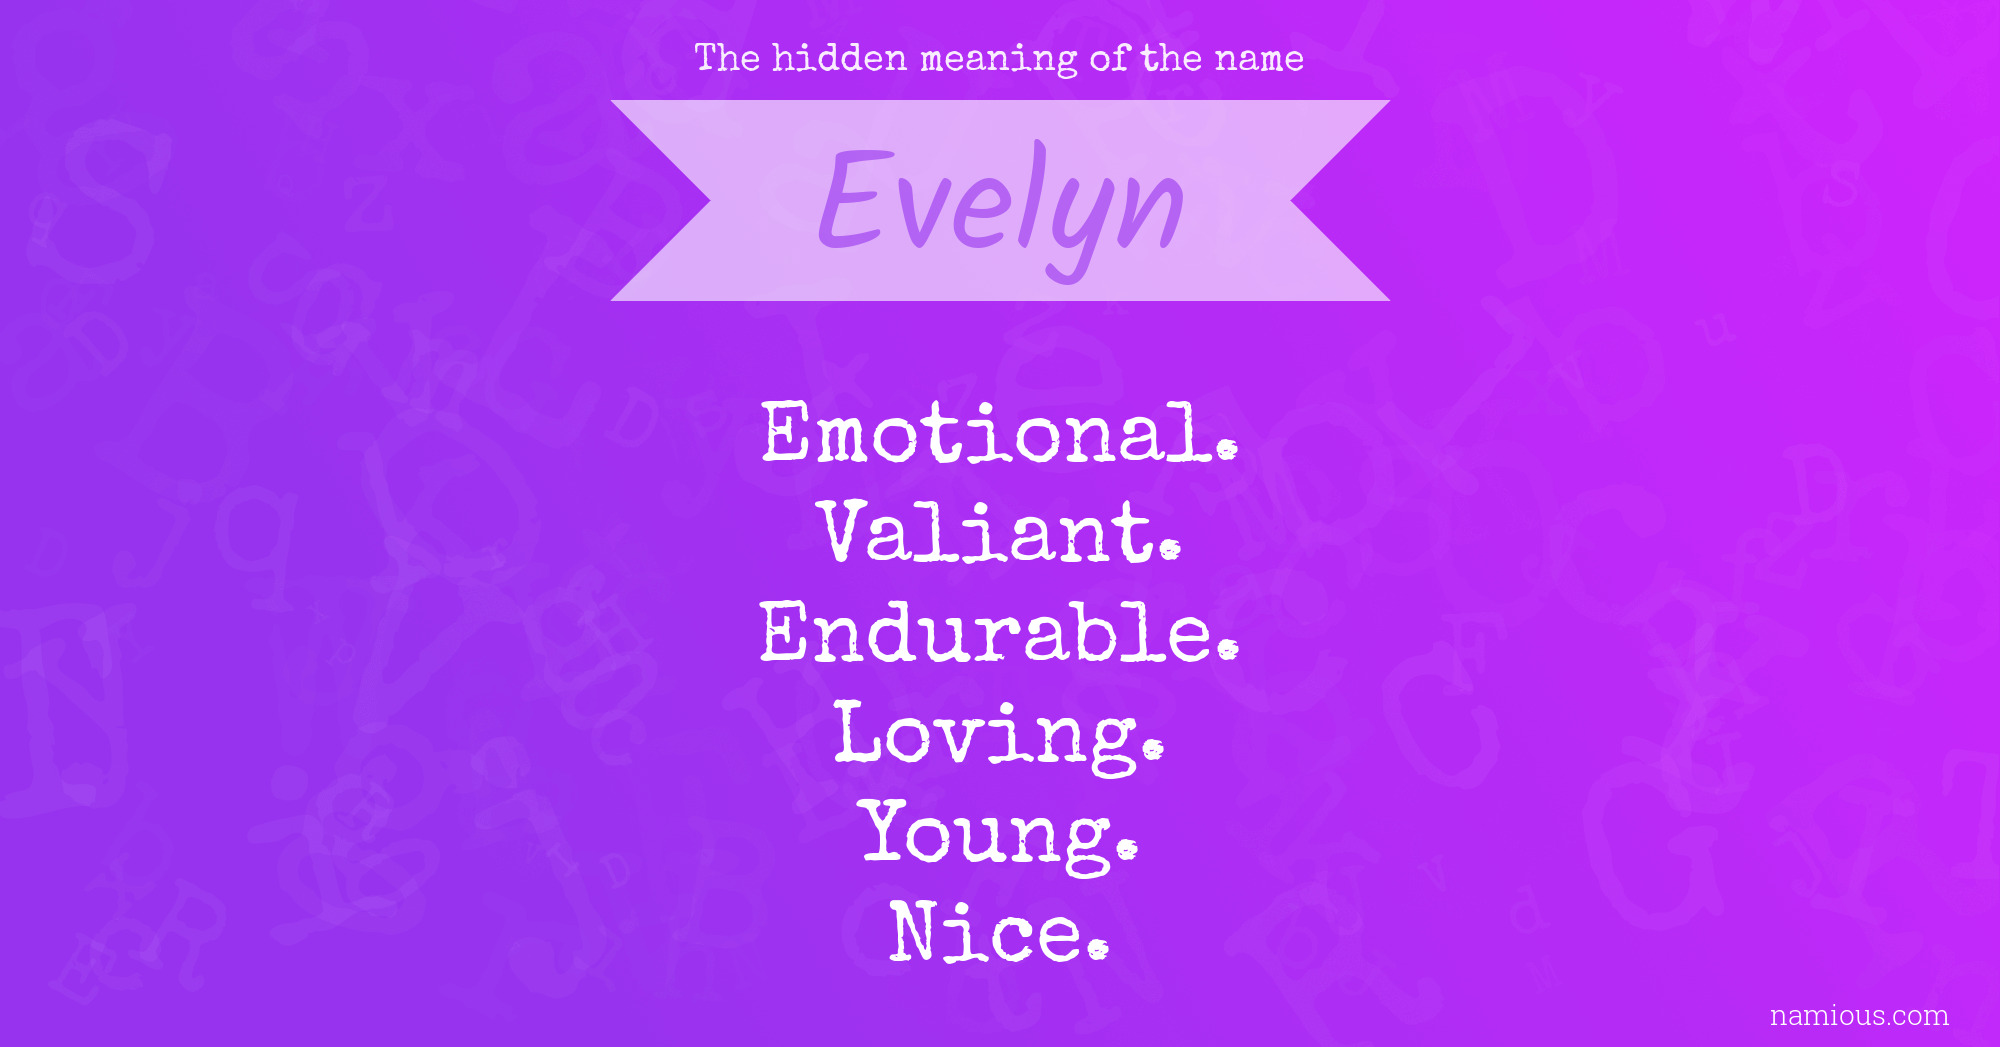 The hidden meaning of the name Evelyn